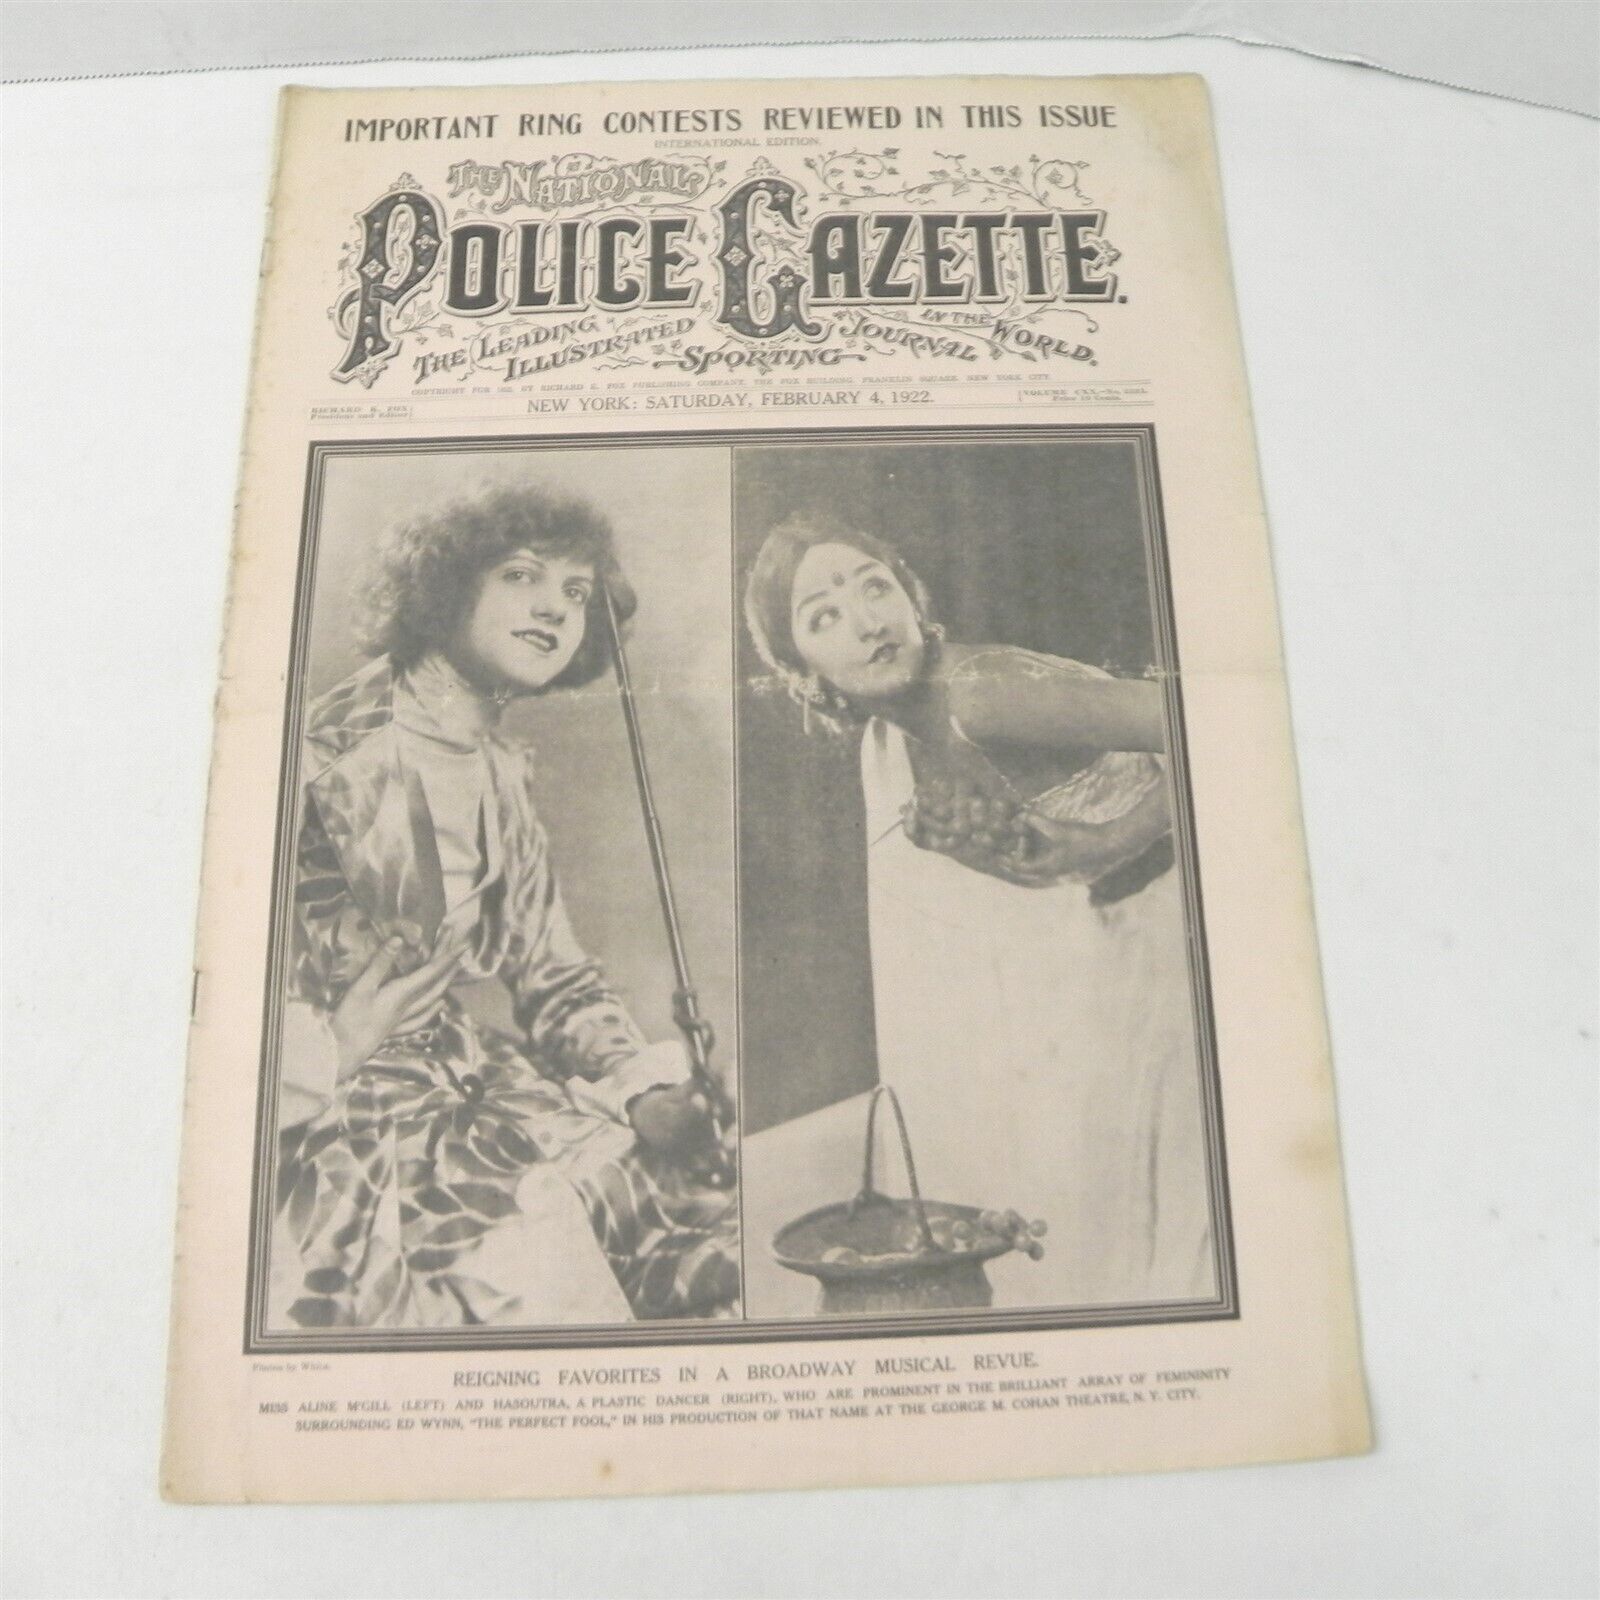 VINTAGE 1922 POLICE GAZETTE NEWSPAPER SPORTS ARTICLES PINUP CLASSIFIED STORIES